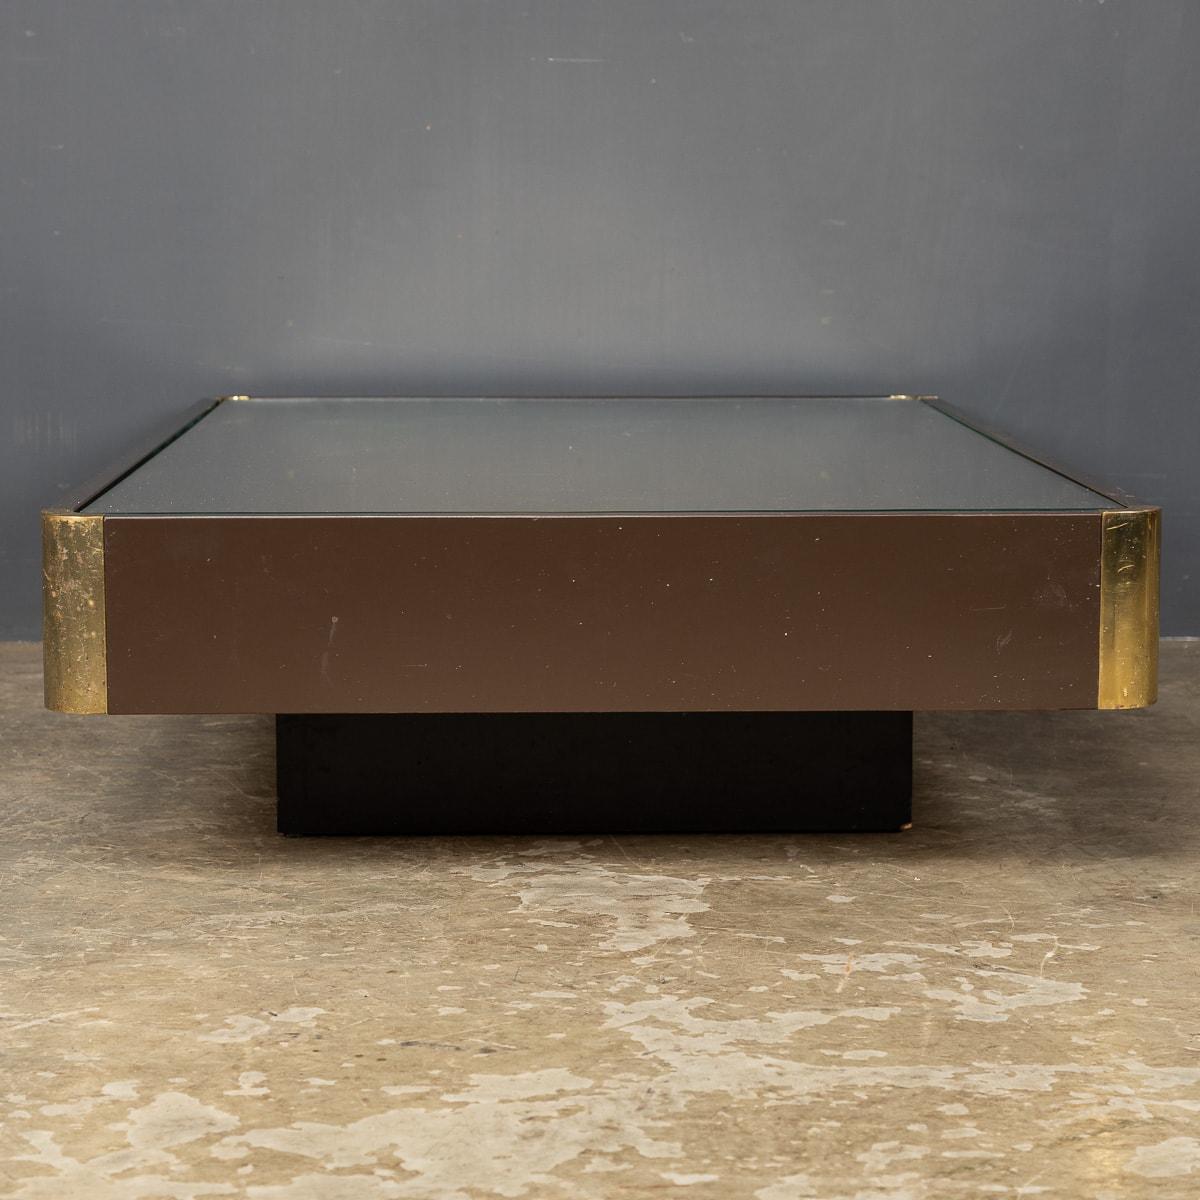 20th Century Italian Brass Top Coffee Table By Willy Rizzo, c.1970 For Sale 1